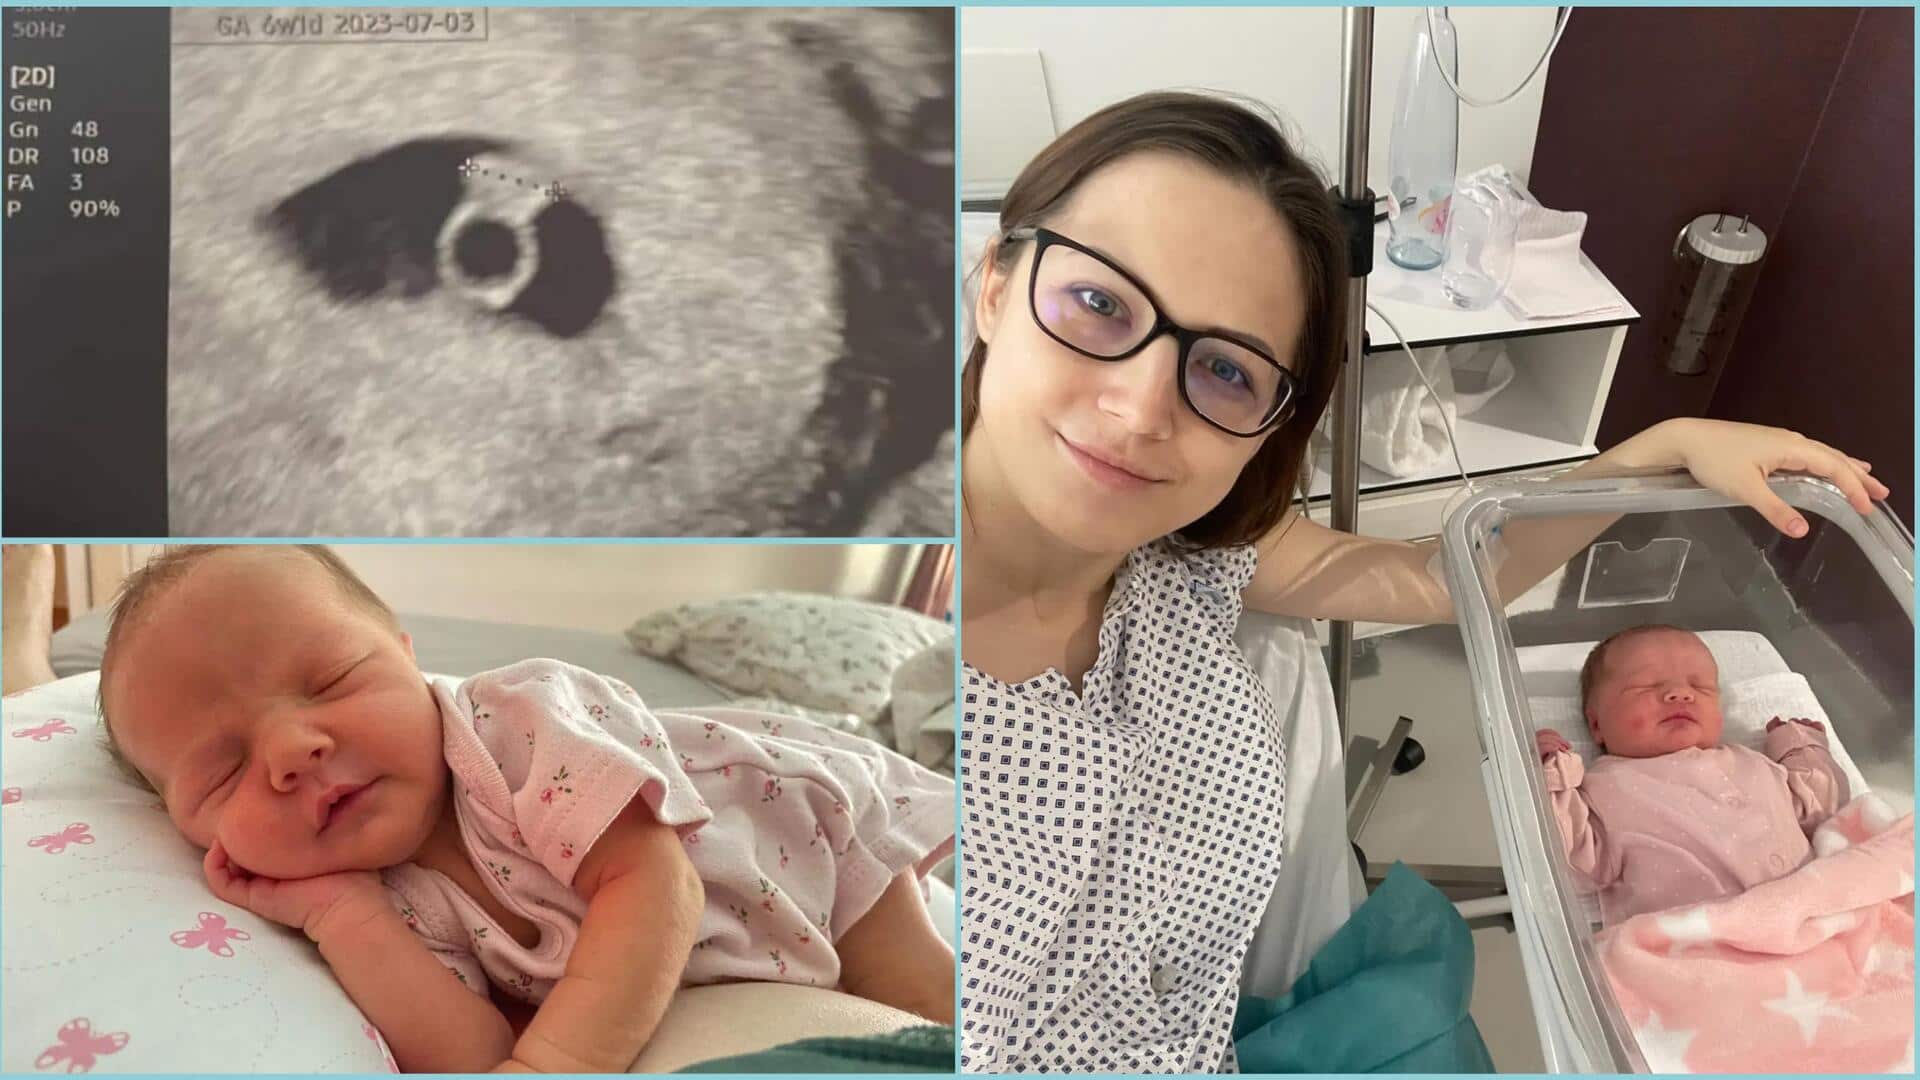 Woman with two vaginas gives birth to 'miracle baby' 